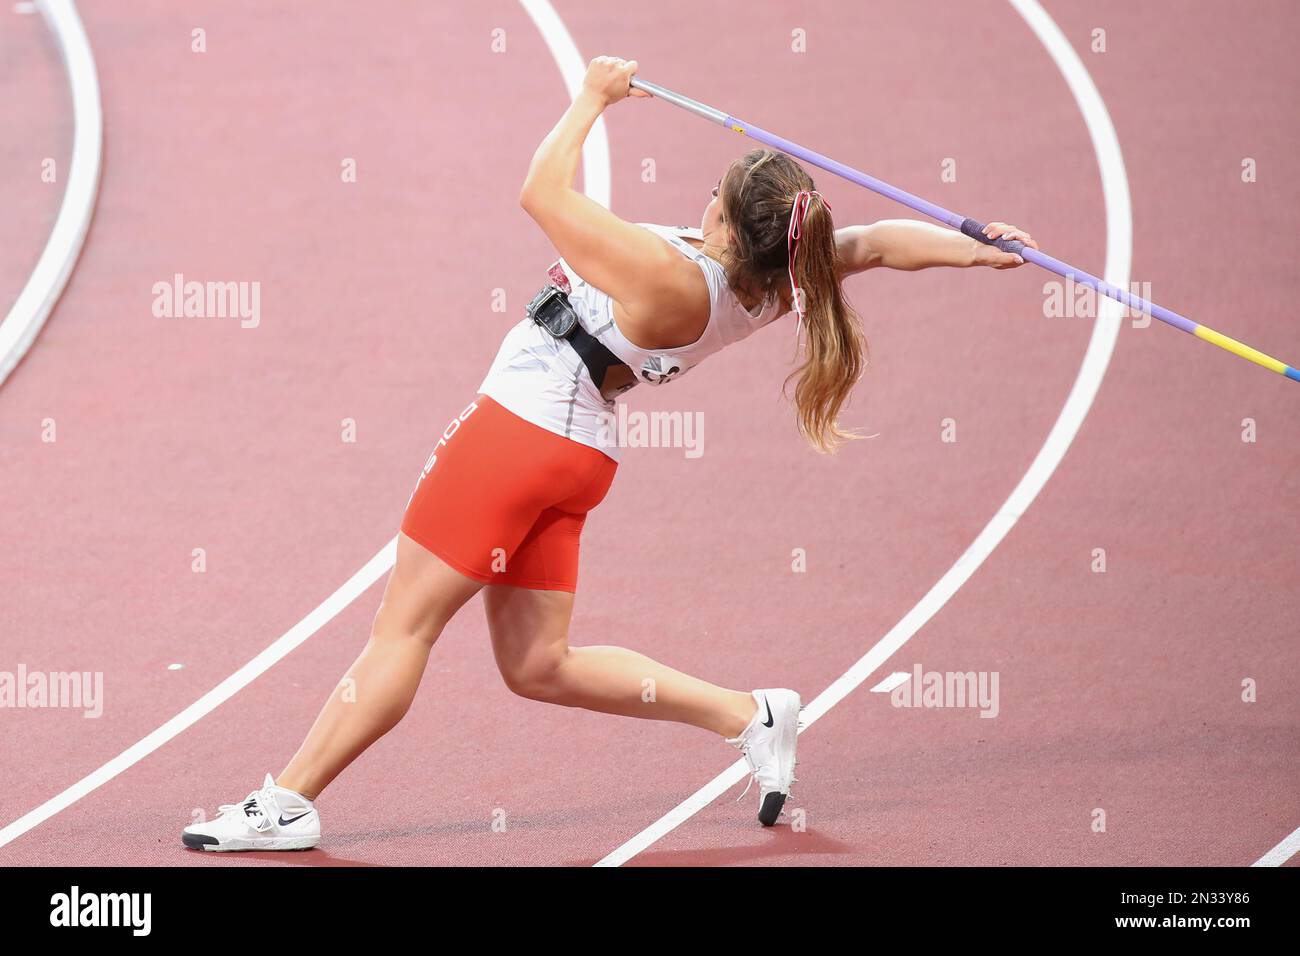 AUG 06, 2021 - Tokyo, Japan: Maria ANDREJCZYK of Poland in the Athletics Women's Javelin Throw Final at the Tokyo 2020 Olympic Games (Photo: Mickael C Stock Photo